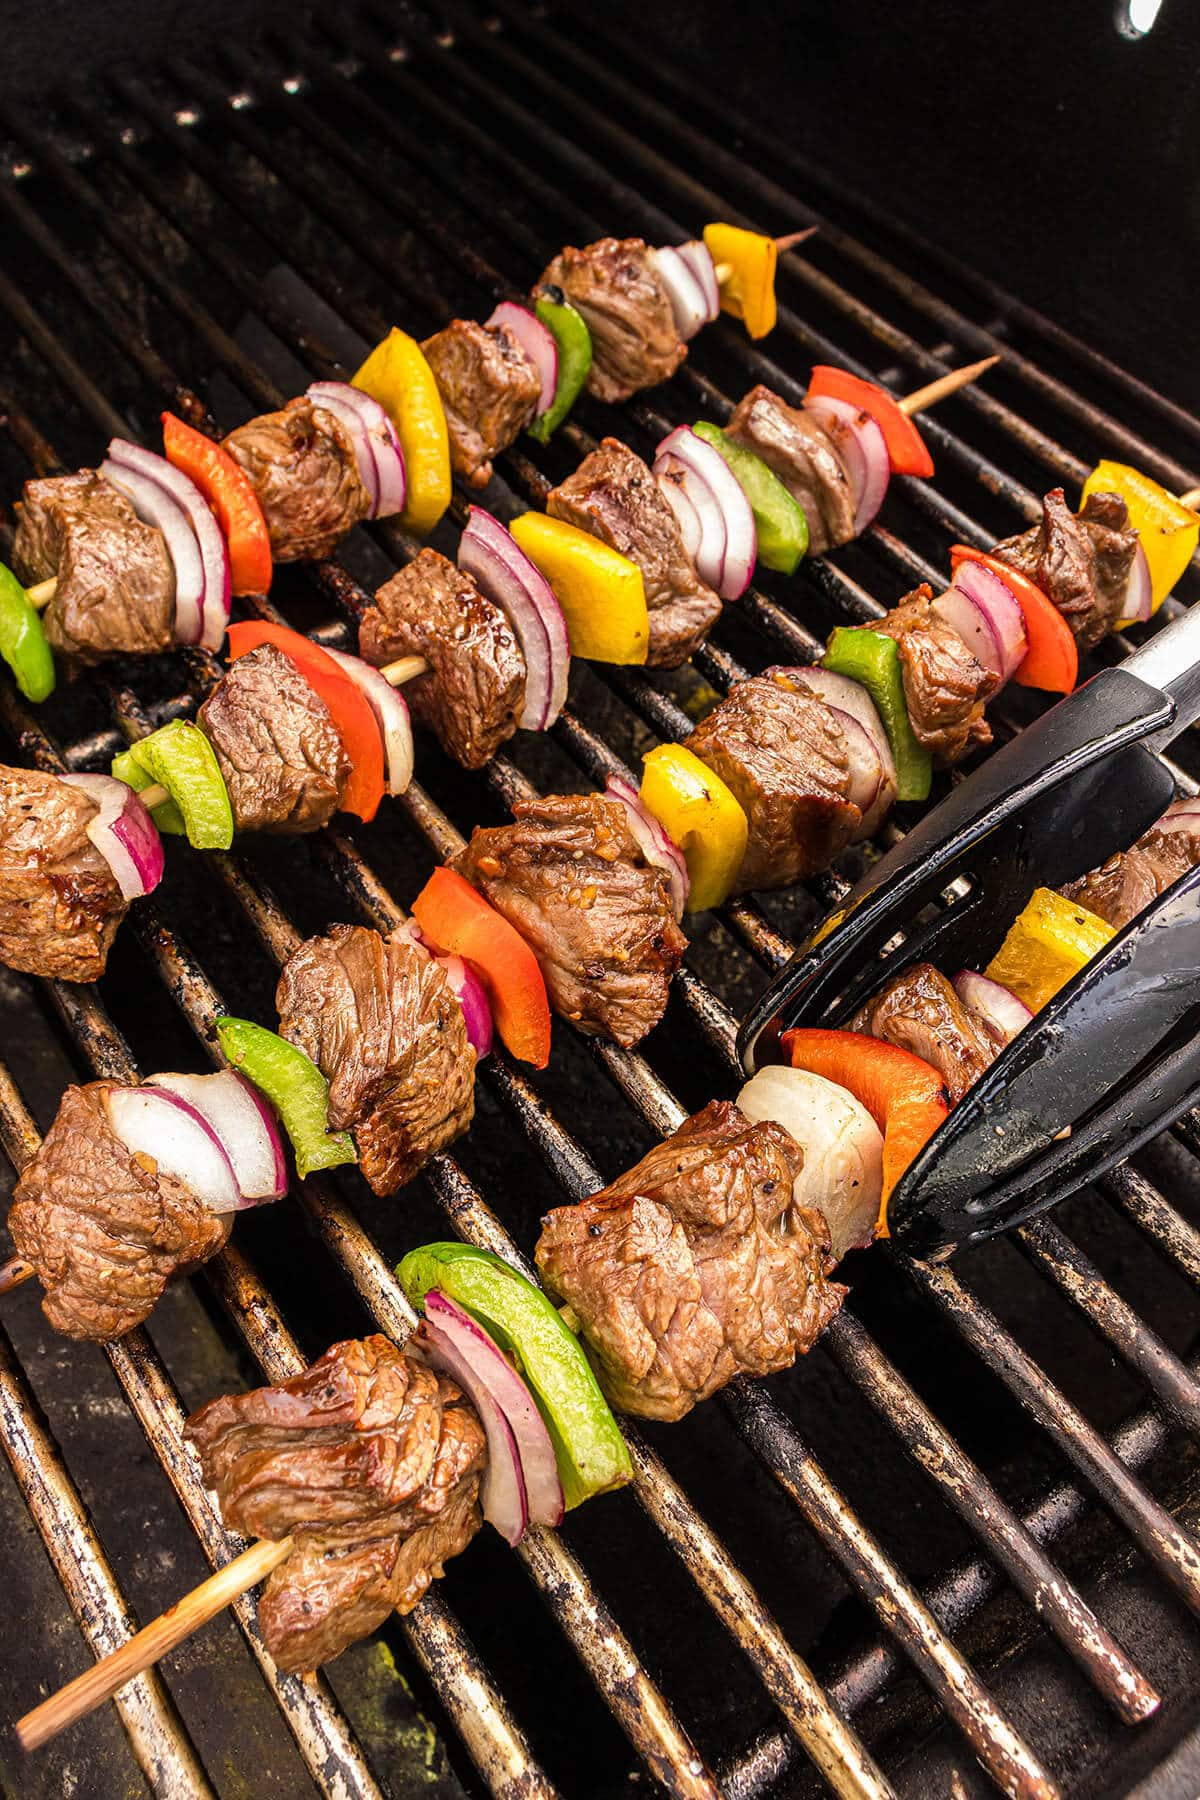 Kabobs being bbq's on a gas grill.